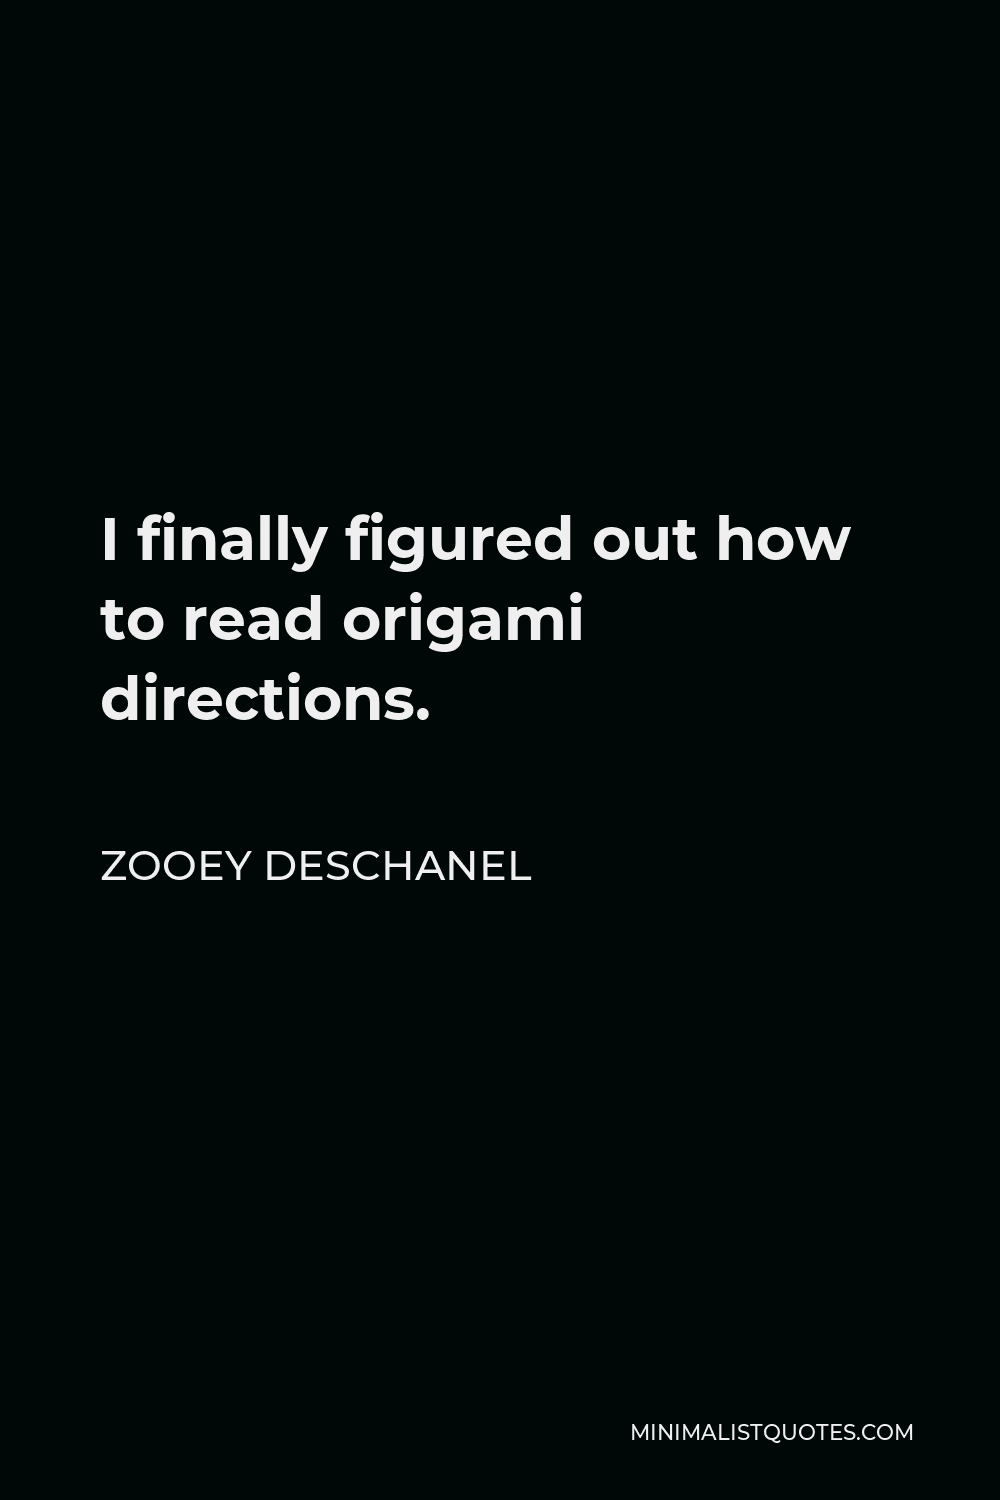 Zooey Deschanel Quote - I finally figured out how to read origami directions.